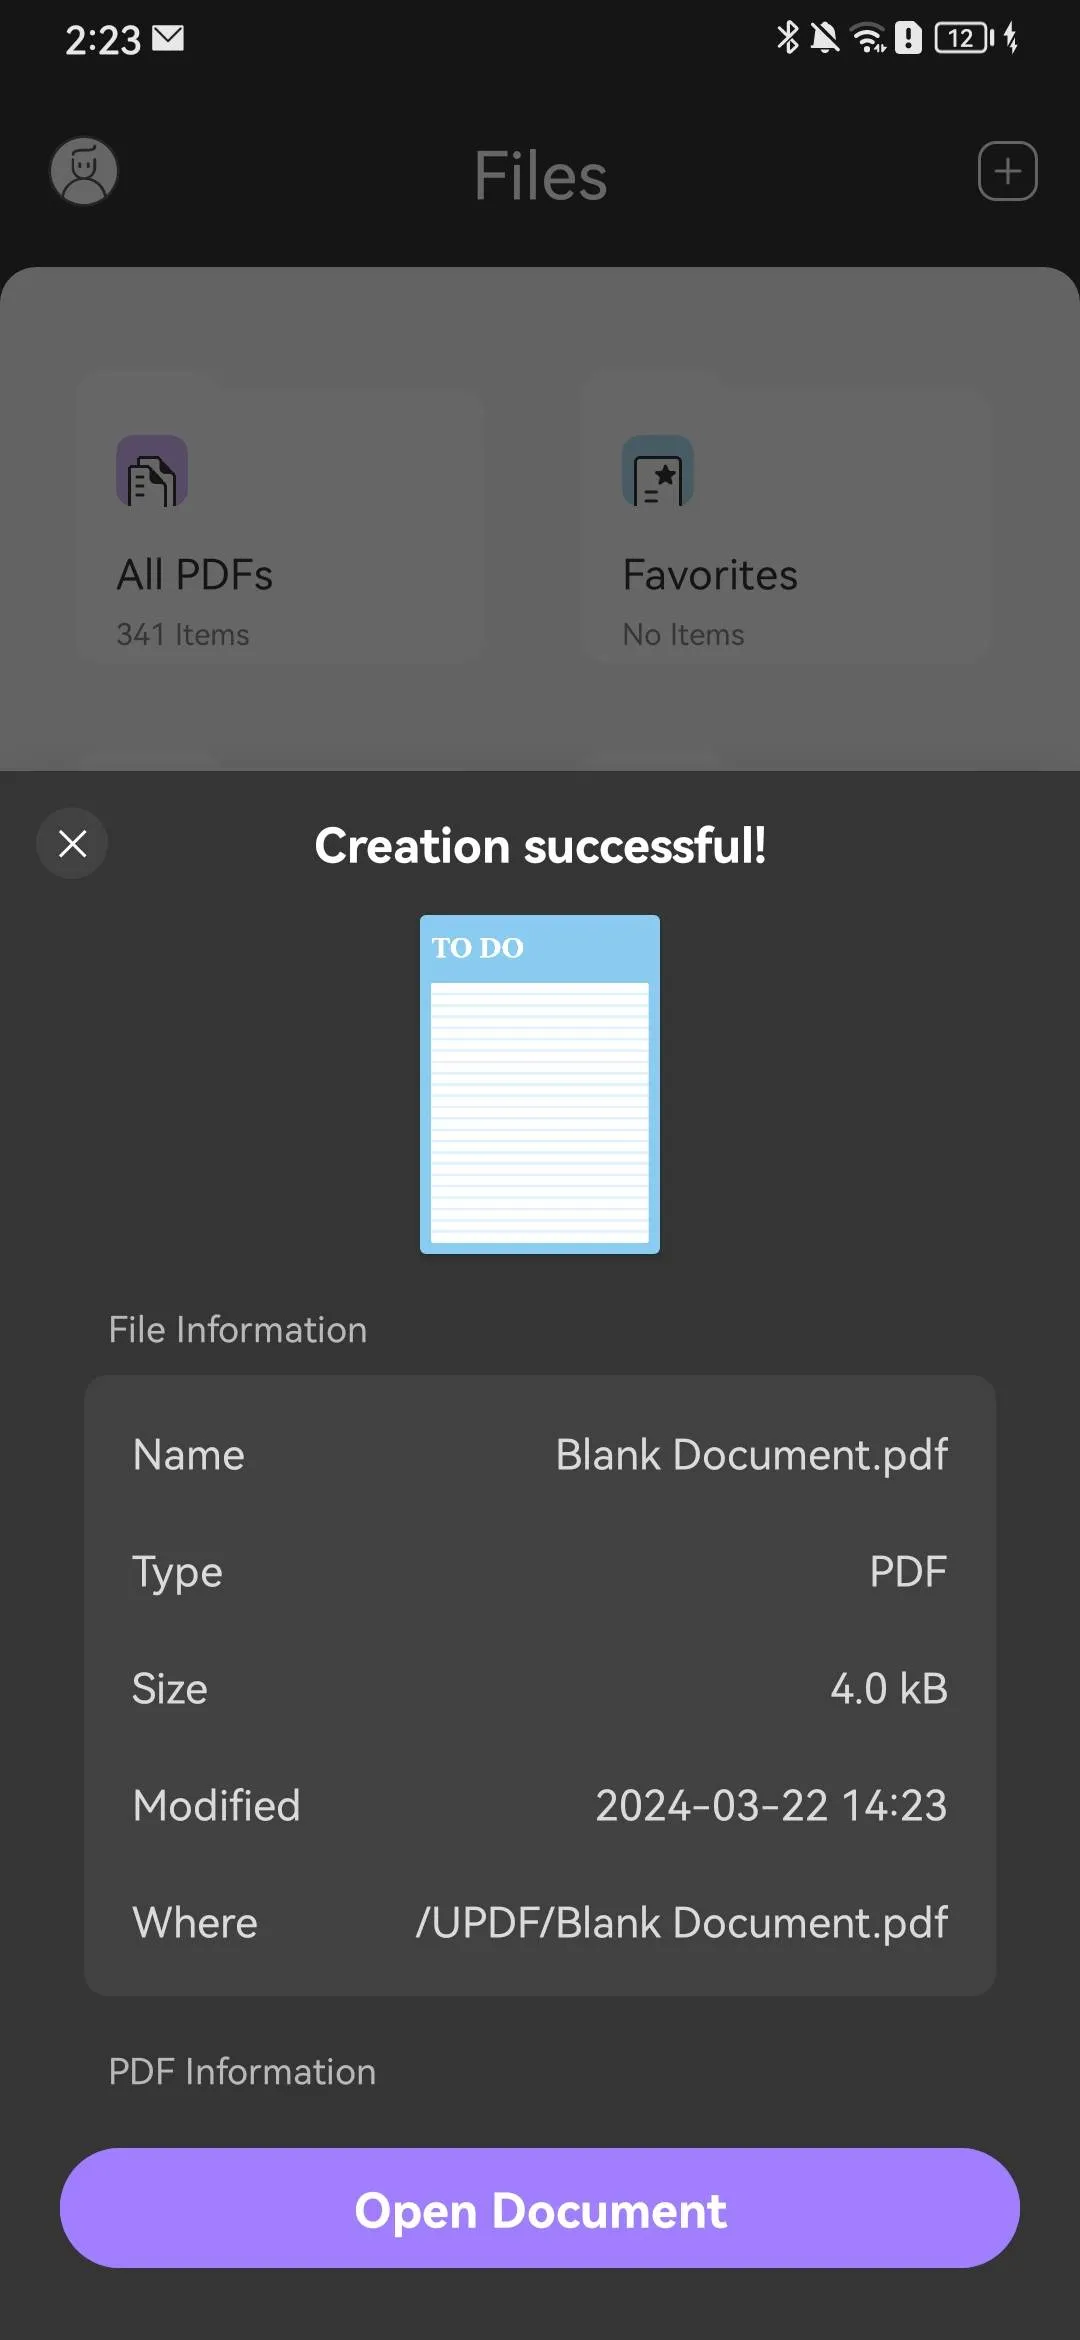 Information of the created PDF